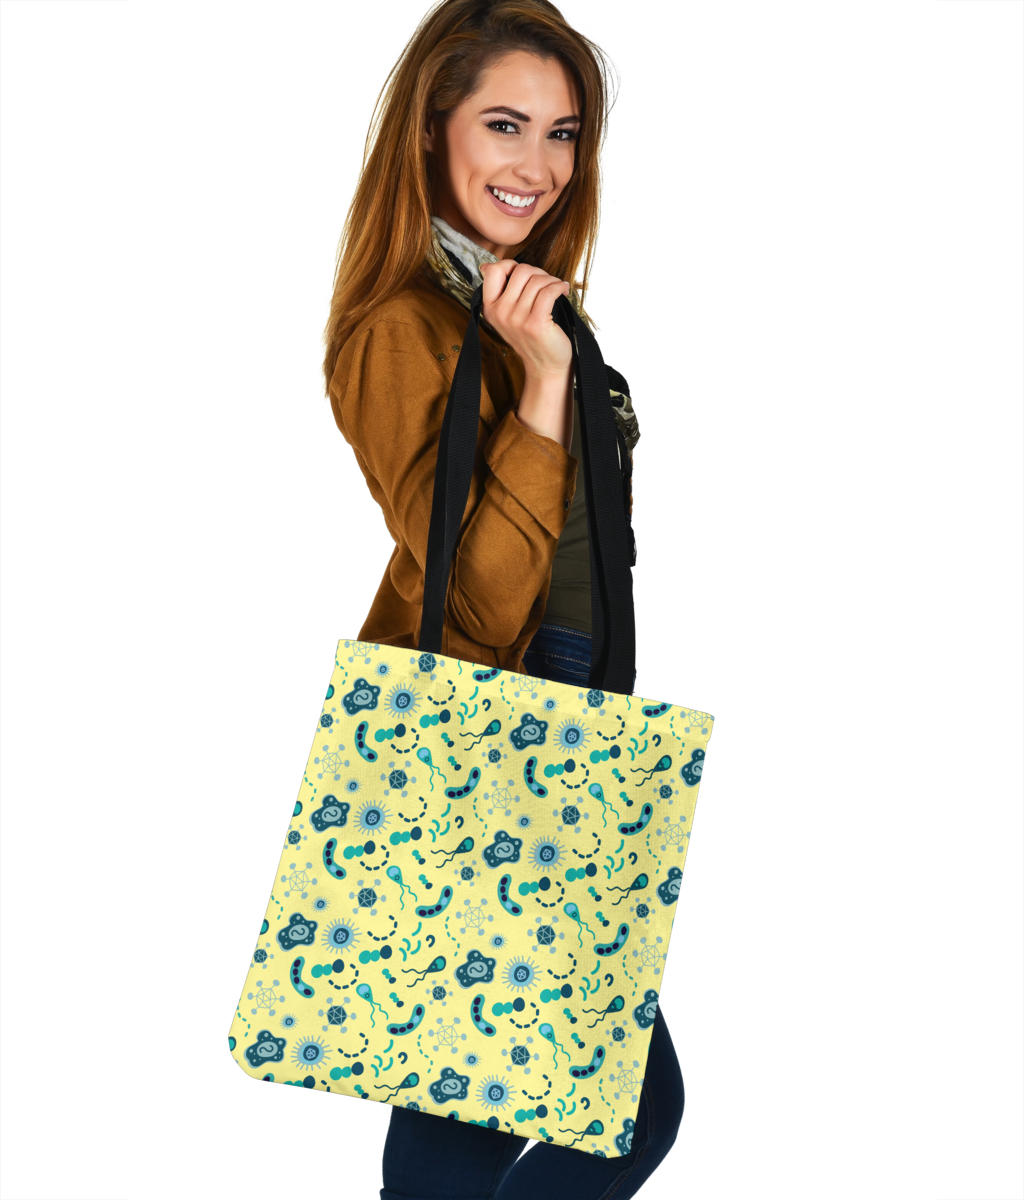 Microbiology Pattern Cloth Tote Bag